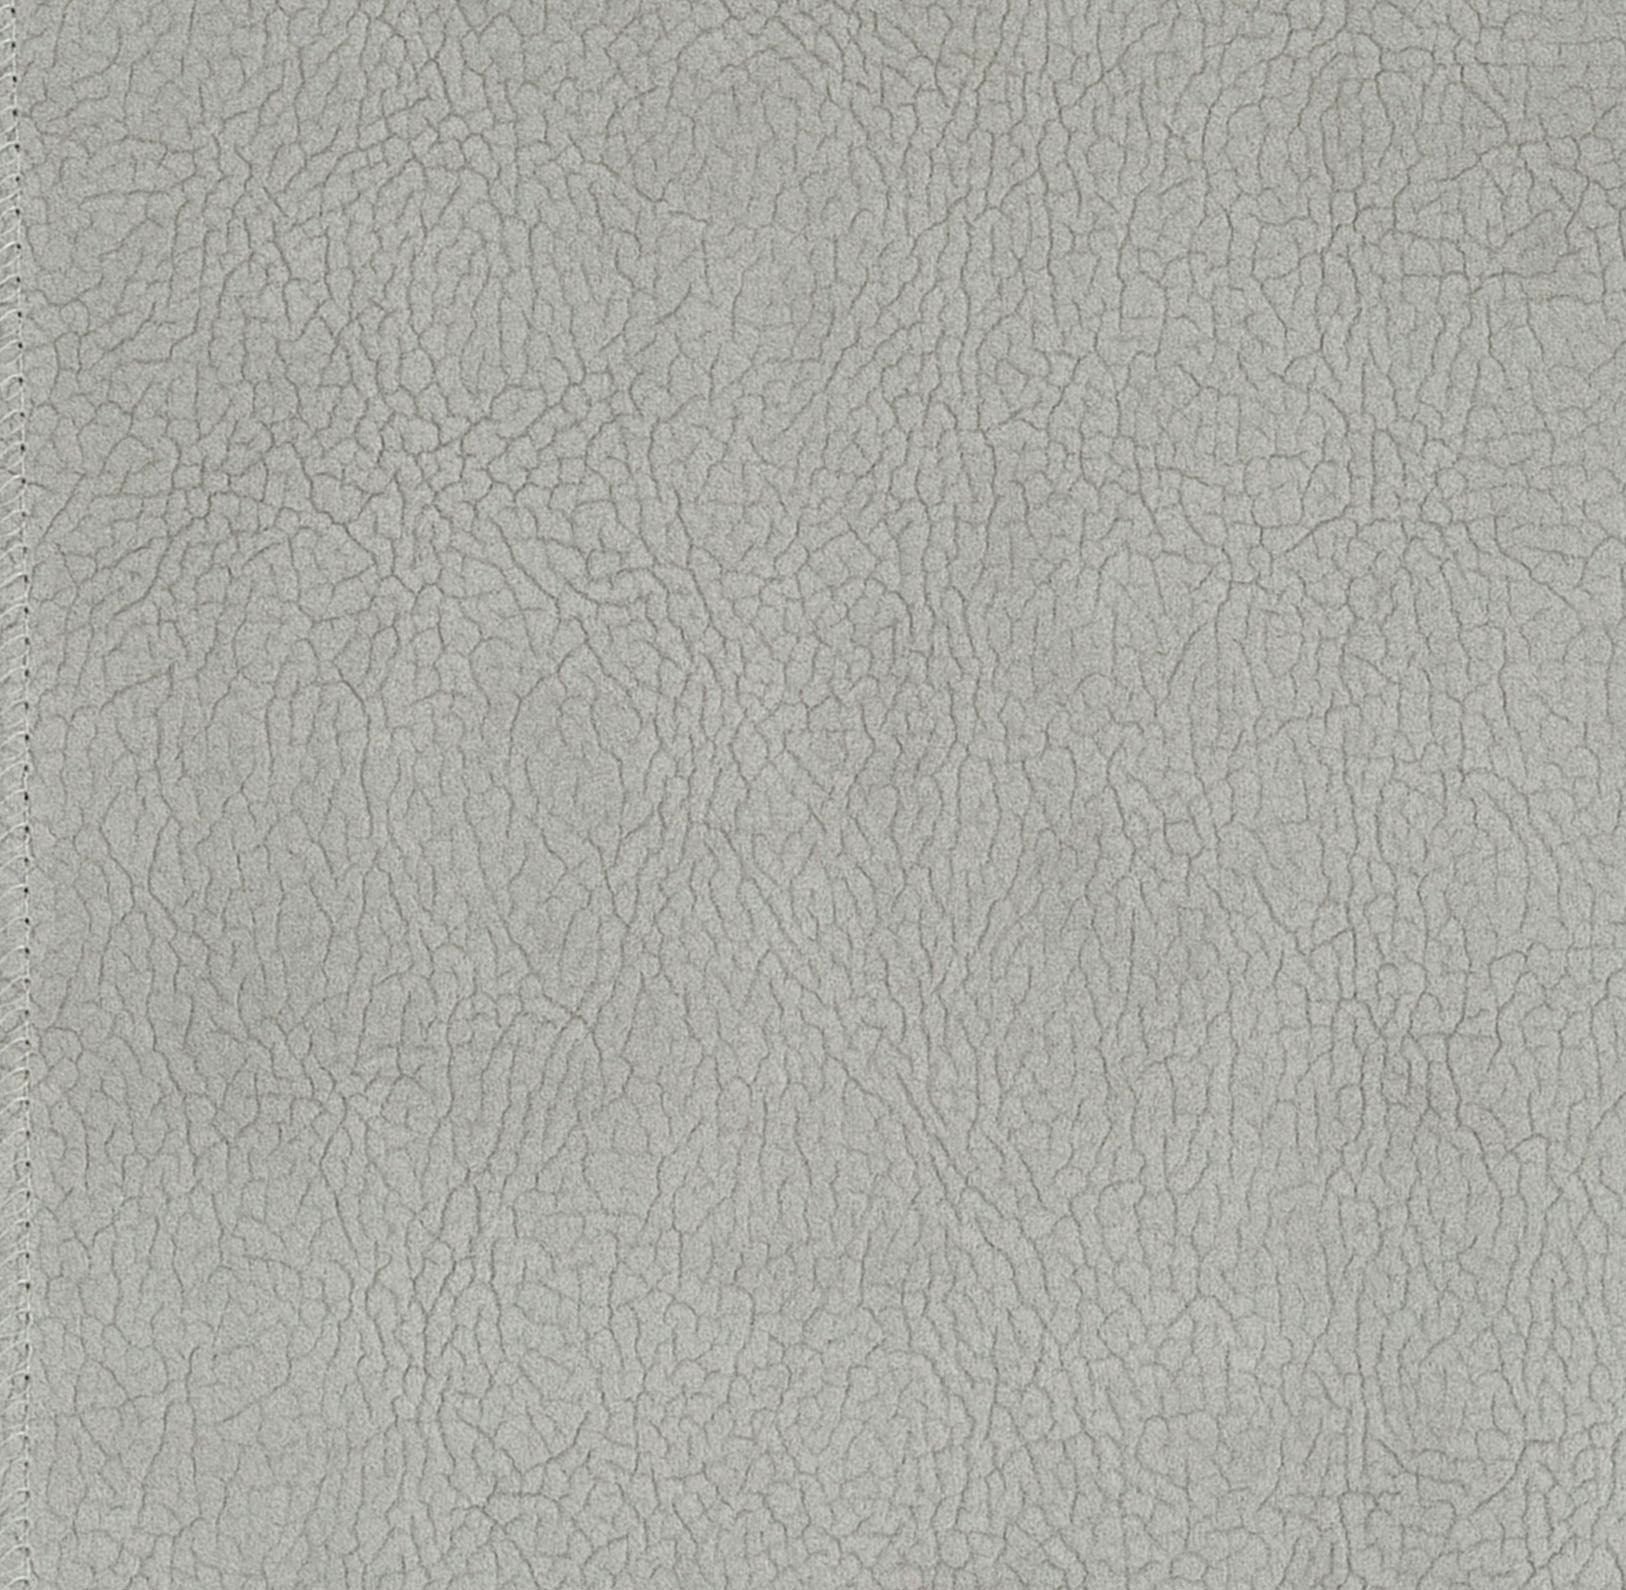 Georgia Suede fabric in nickel color - pattern number H6 37625937 - by Scalamandre in the Old World Weavers collection